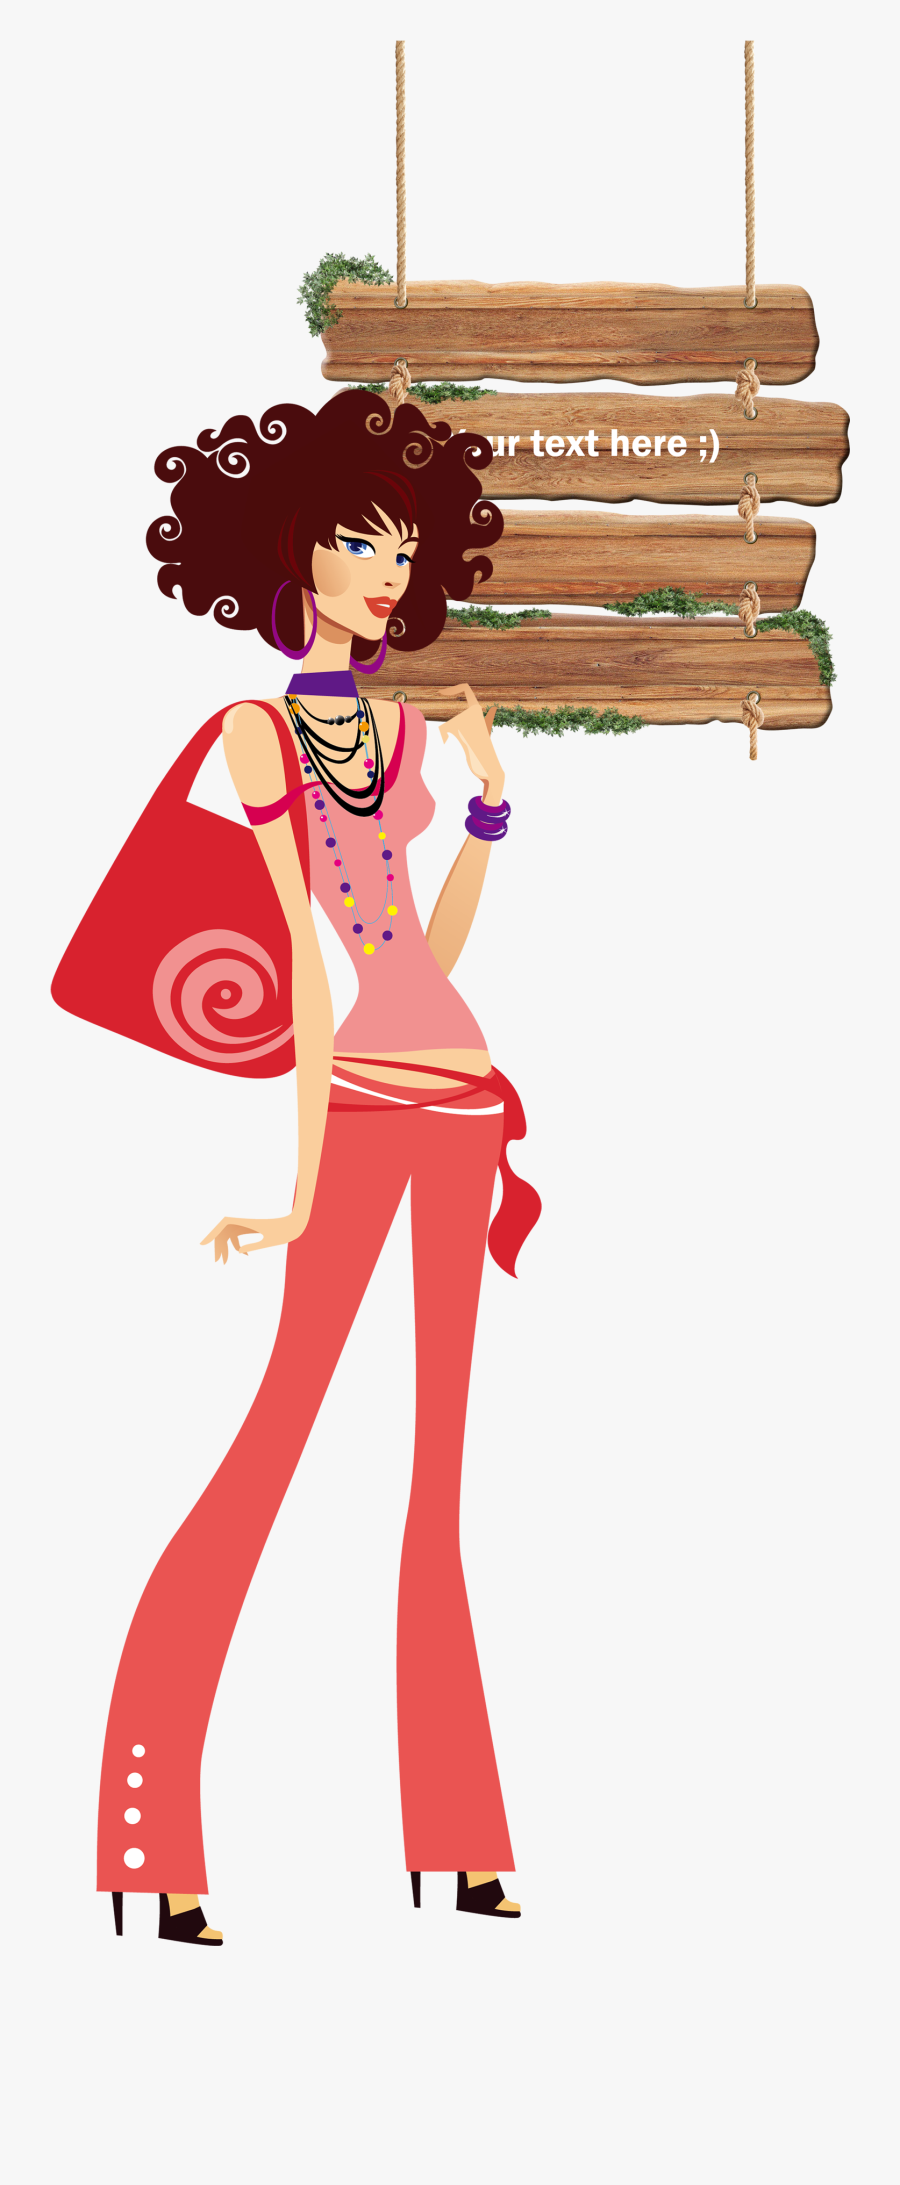 Svg Free Stock Shopping Fashion Girl Clip - 2011, Transparent Clipart